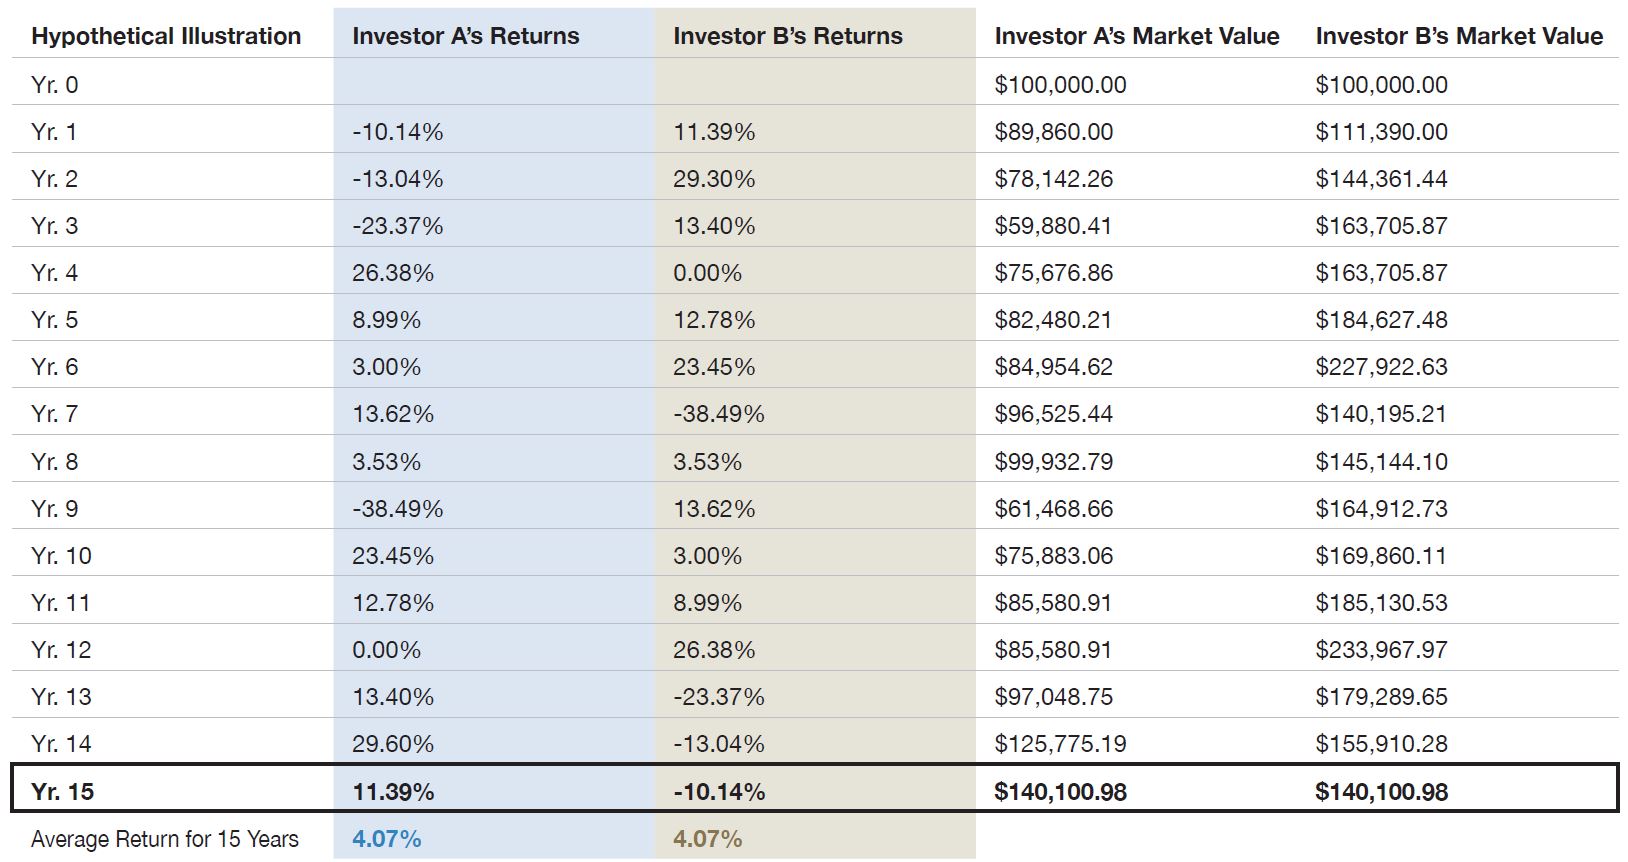 Investor A's returns are 11.39% in year 15 with an average return of 4.07% per year. Investor B's returns are -10.14% in year 15 with an average of 4.07% per year.